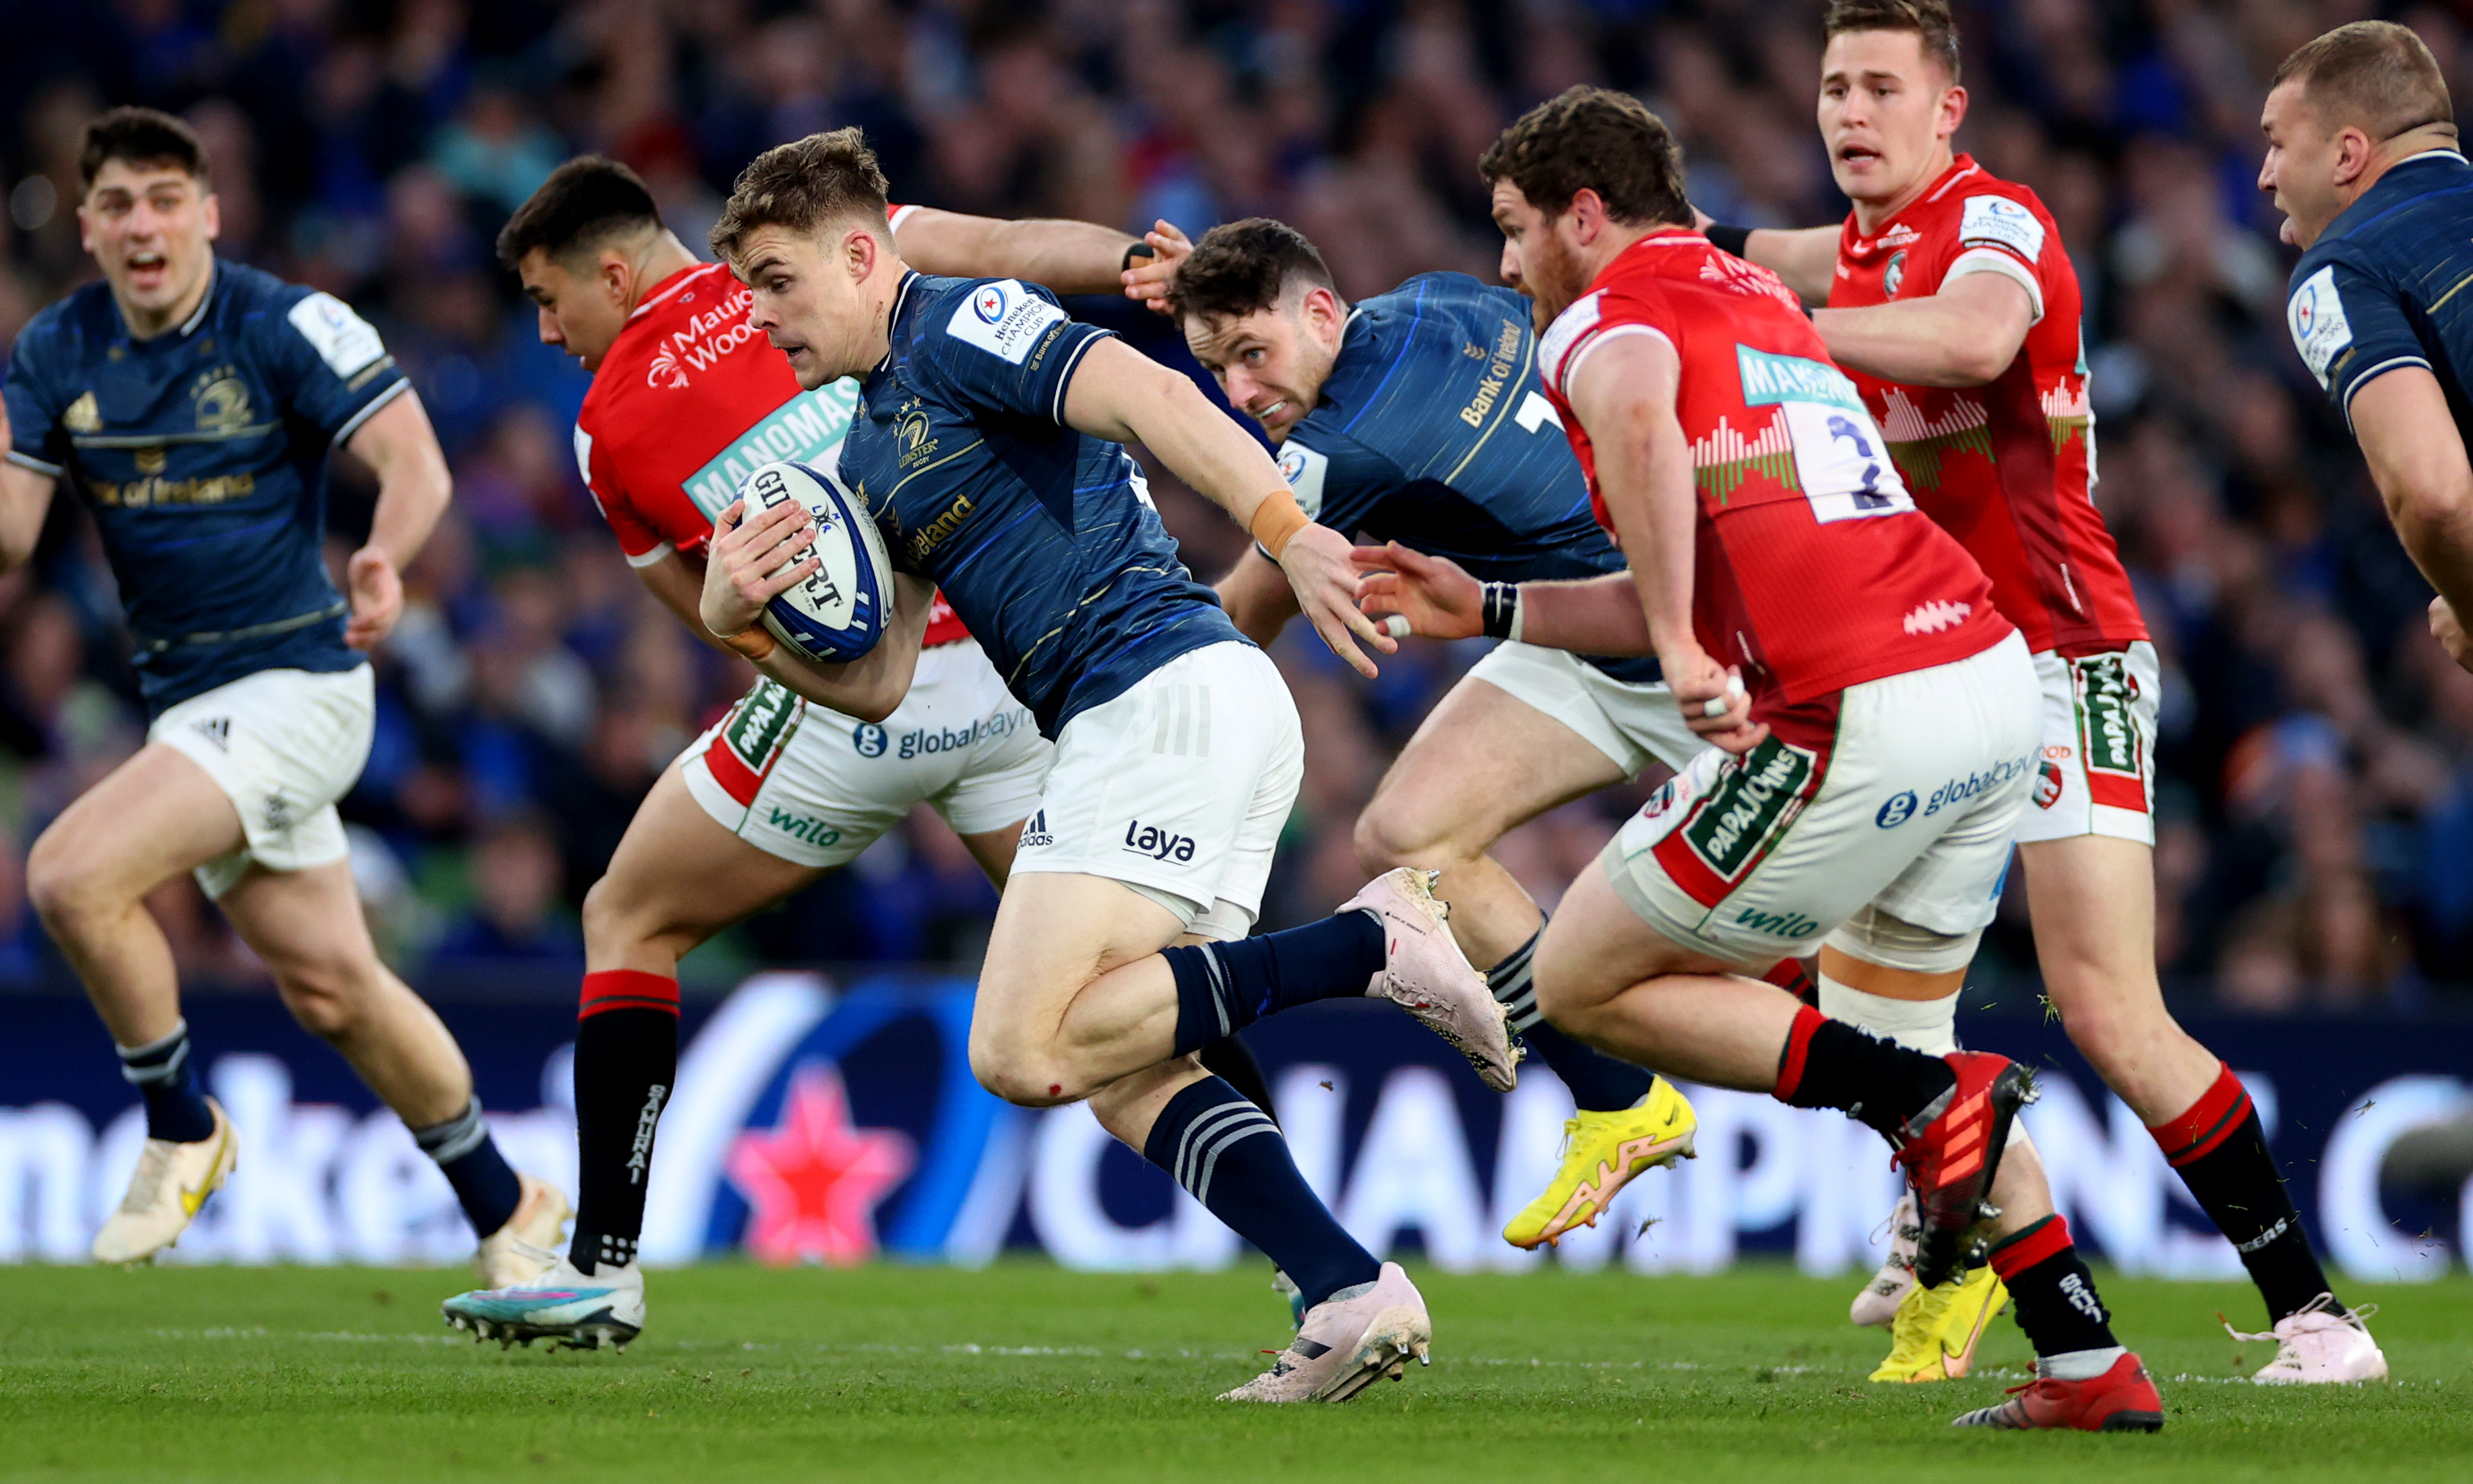 Win a pair of tickets to Leinster vs Toulouse